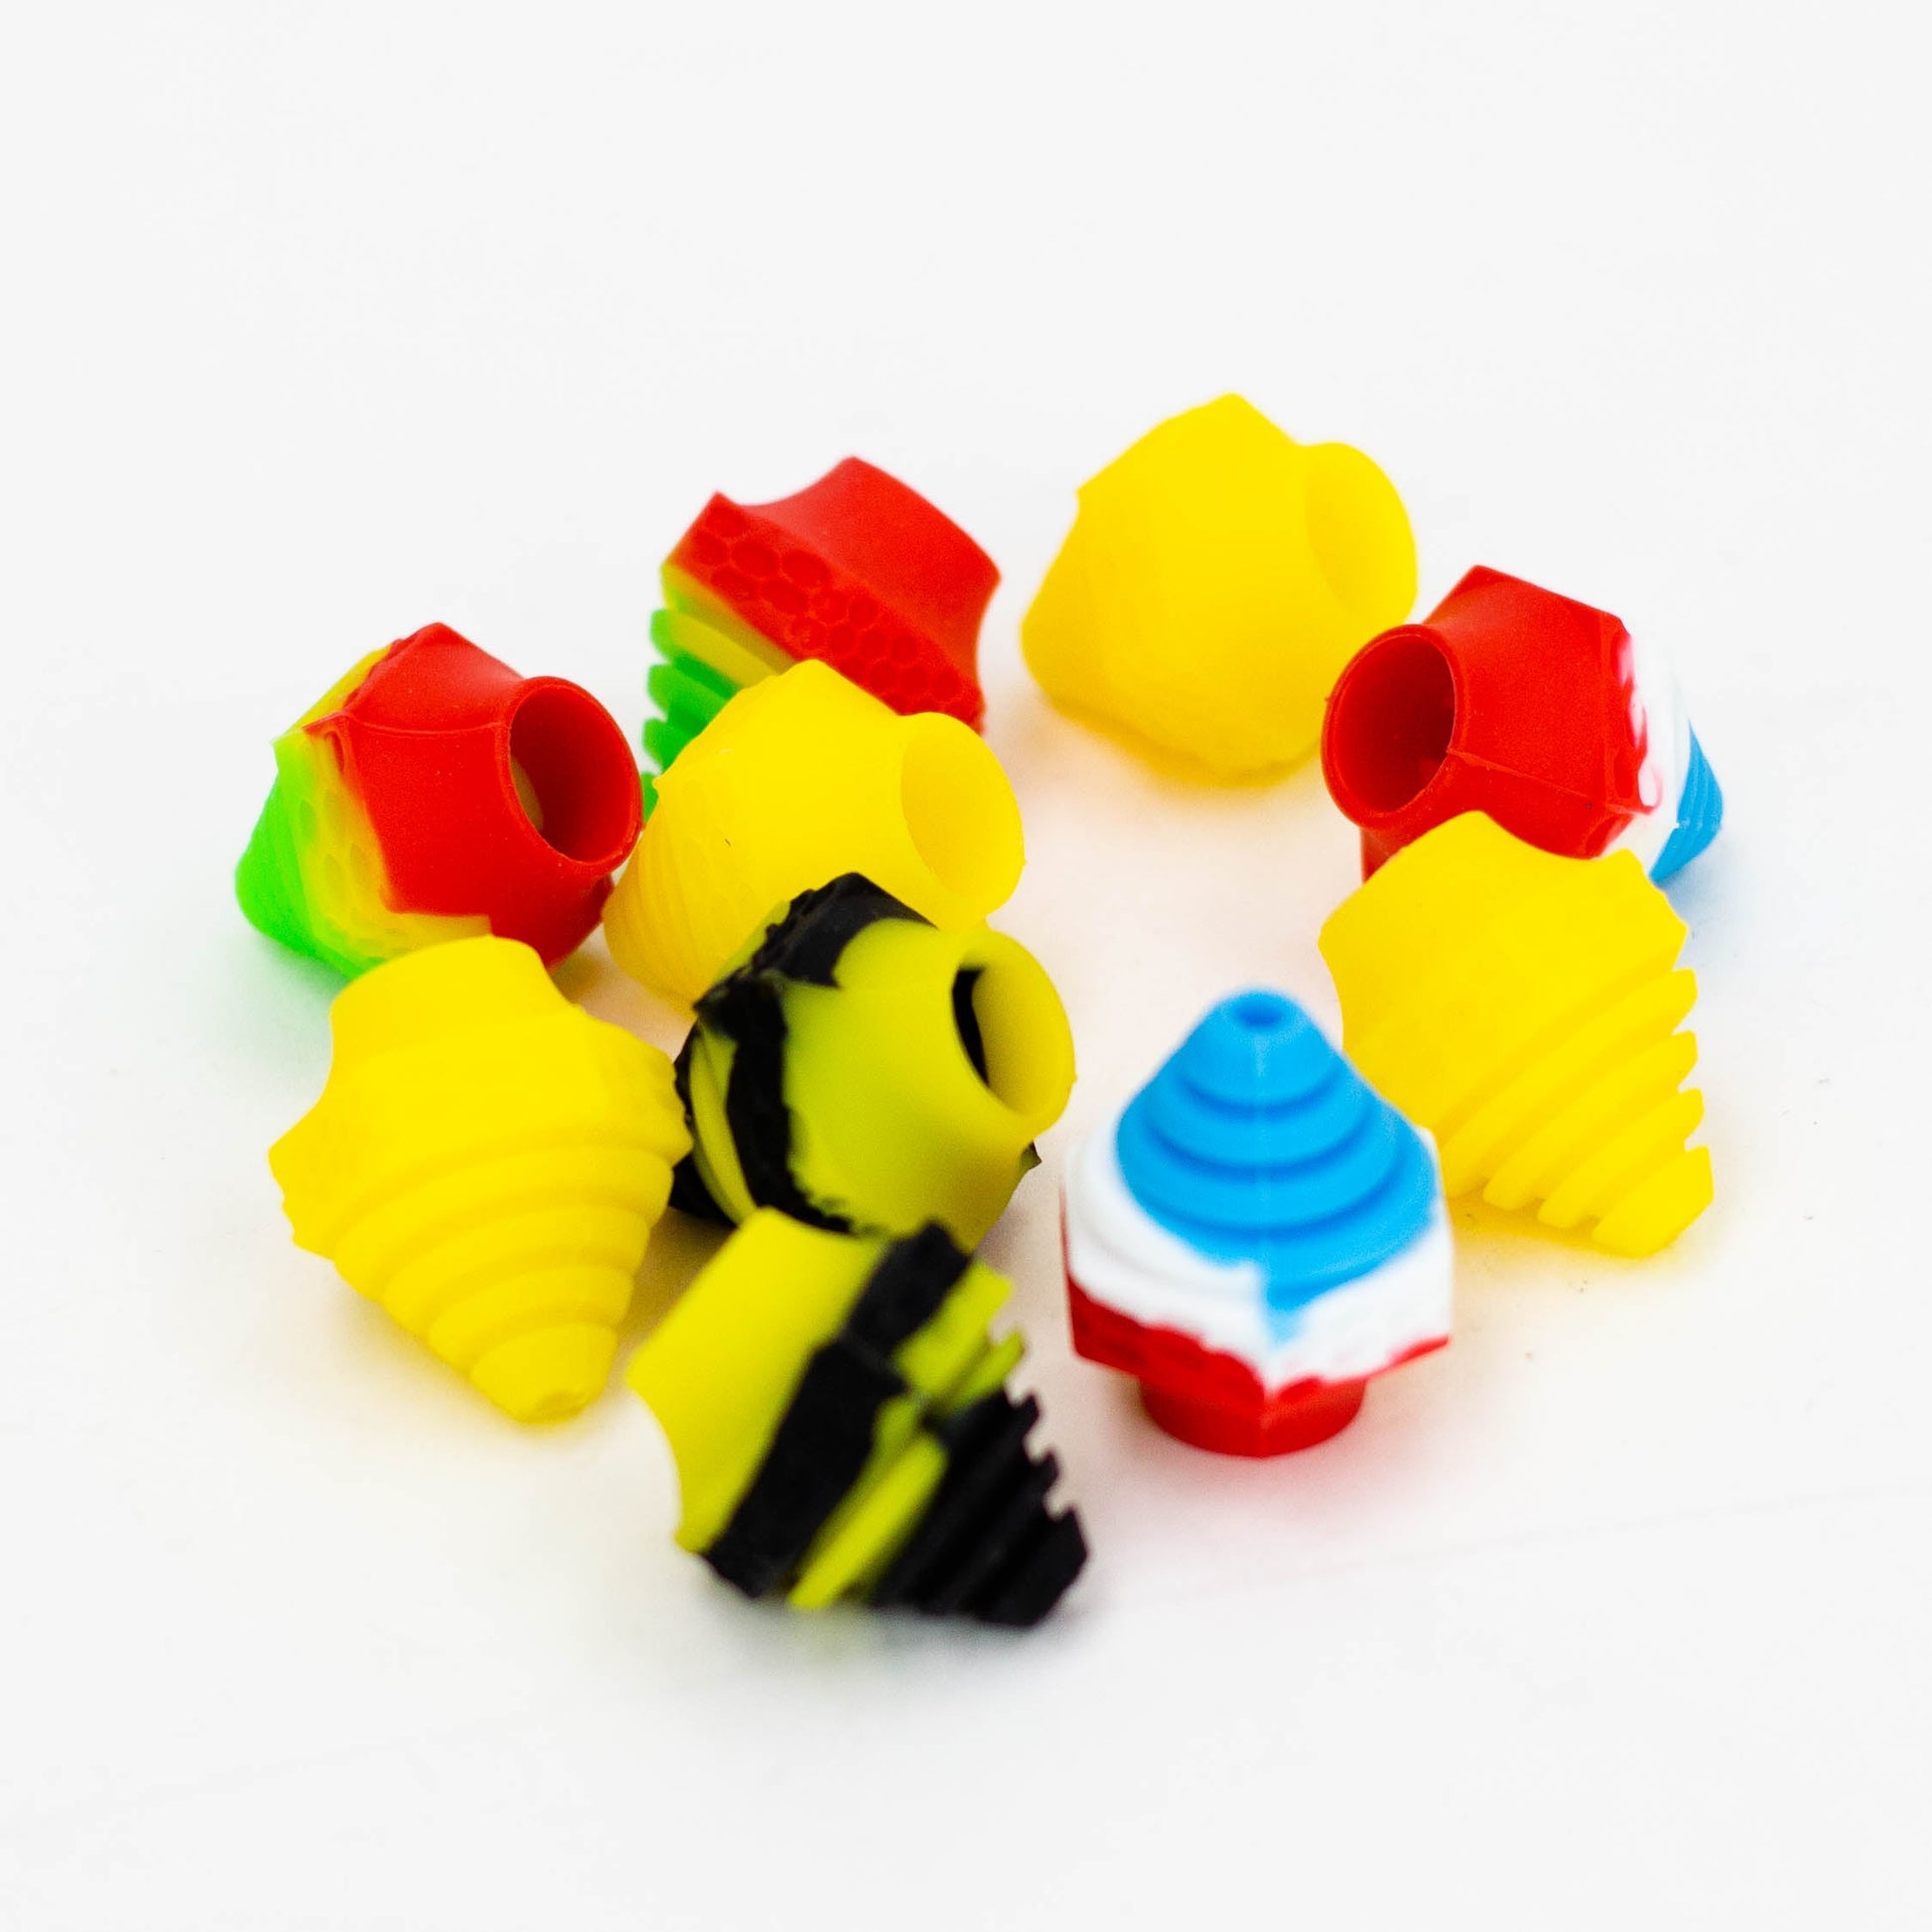 Silicone Cap - Fit For 510 Batteries - Bag of 10 Assorted Colors_0